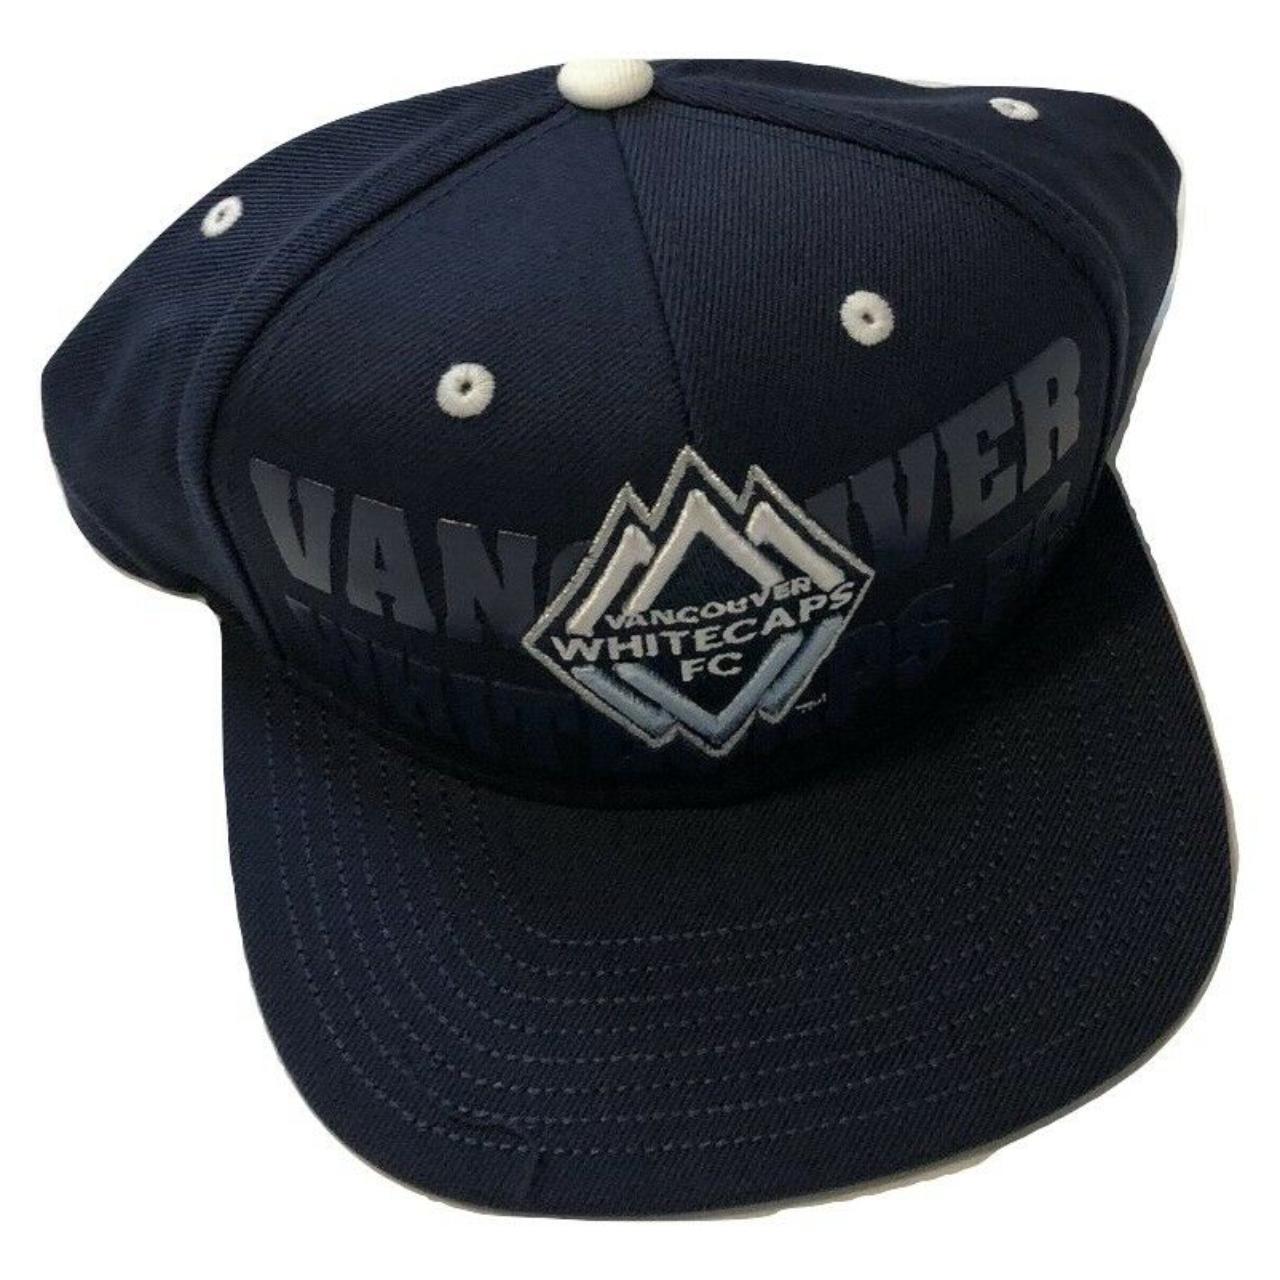 Adidas Men's Navy and White Hat